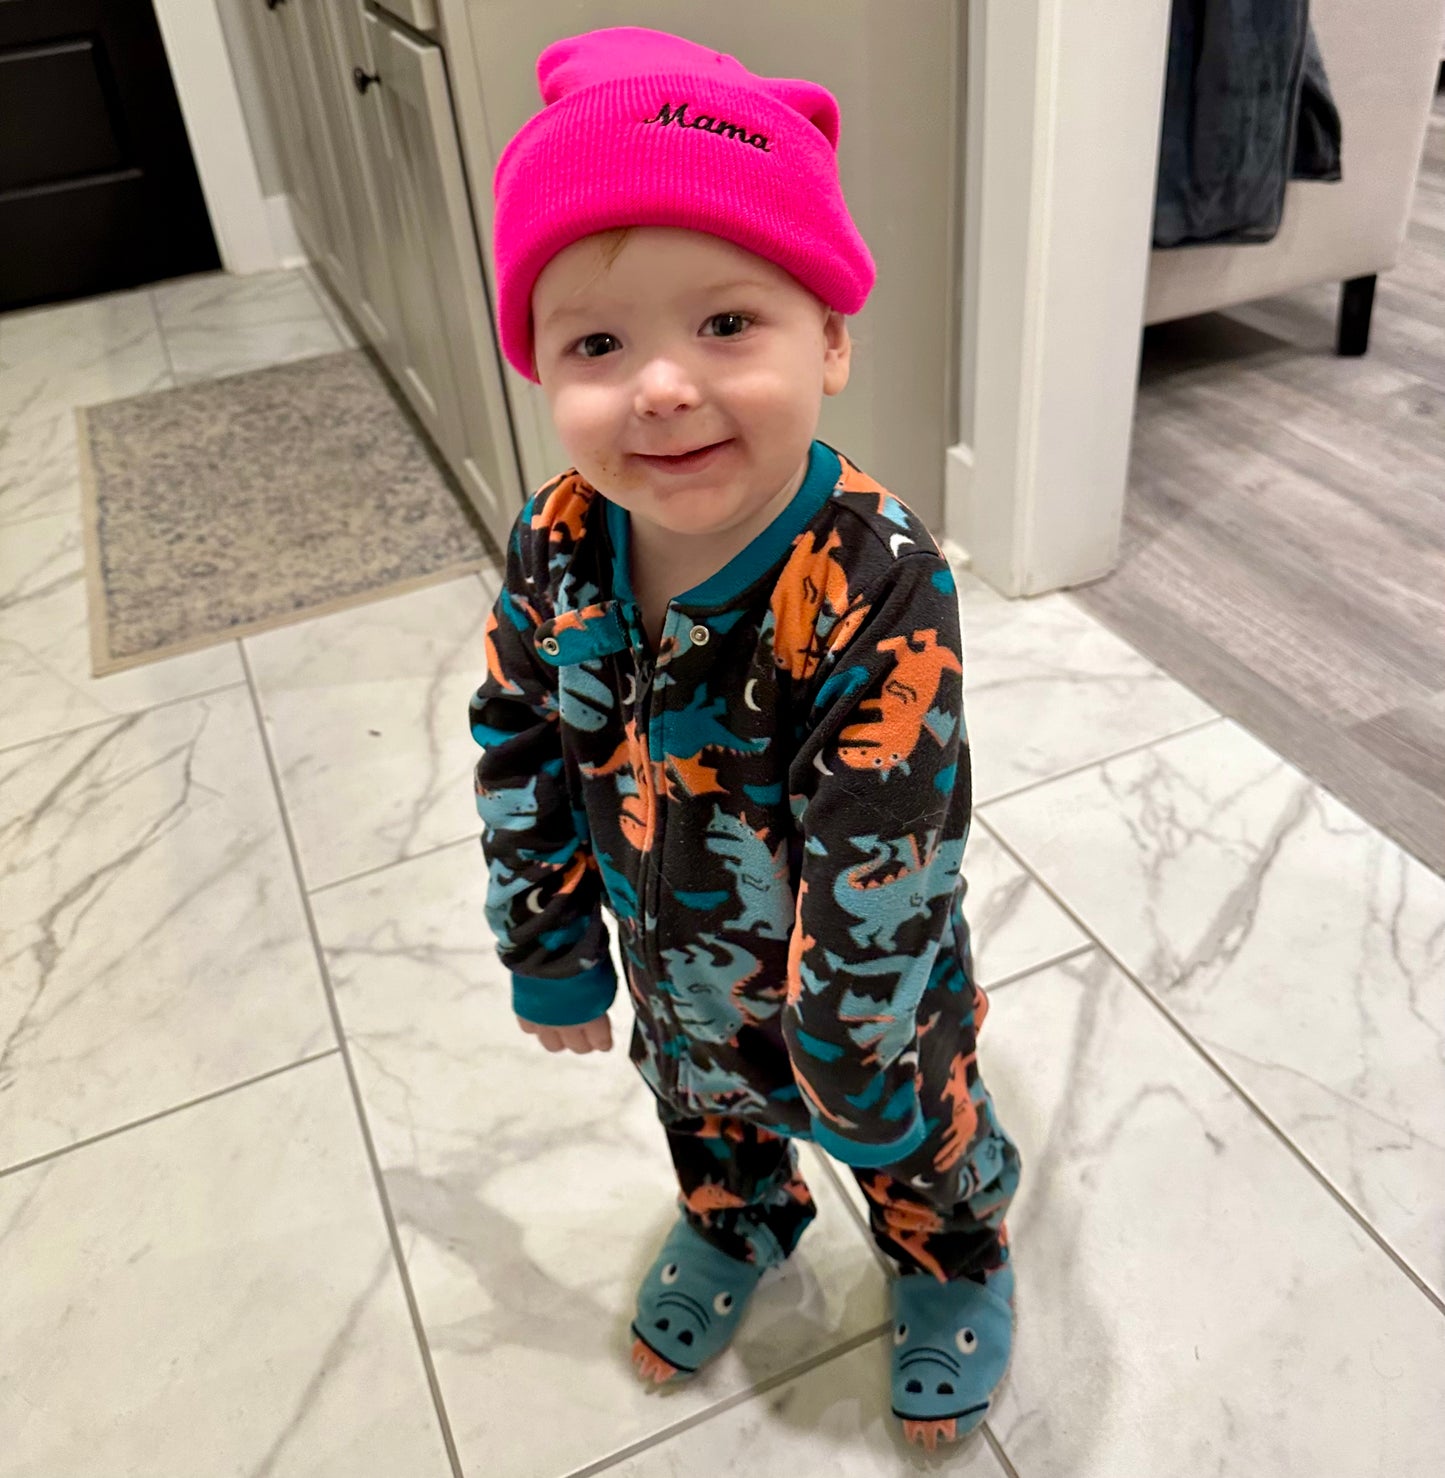 Mama Embroidered Hot Pink Beanie